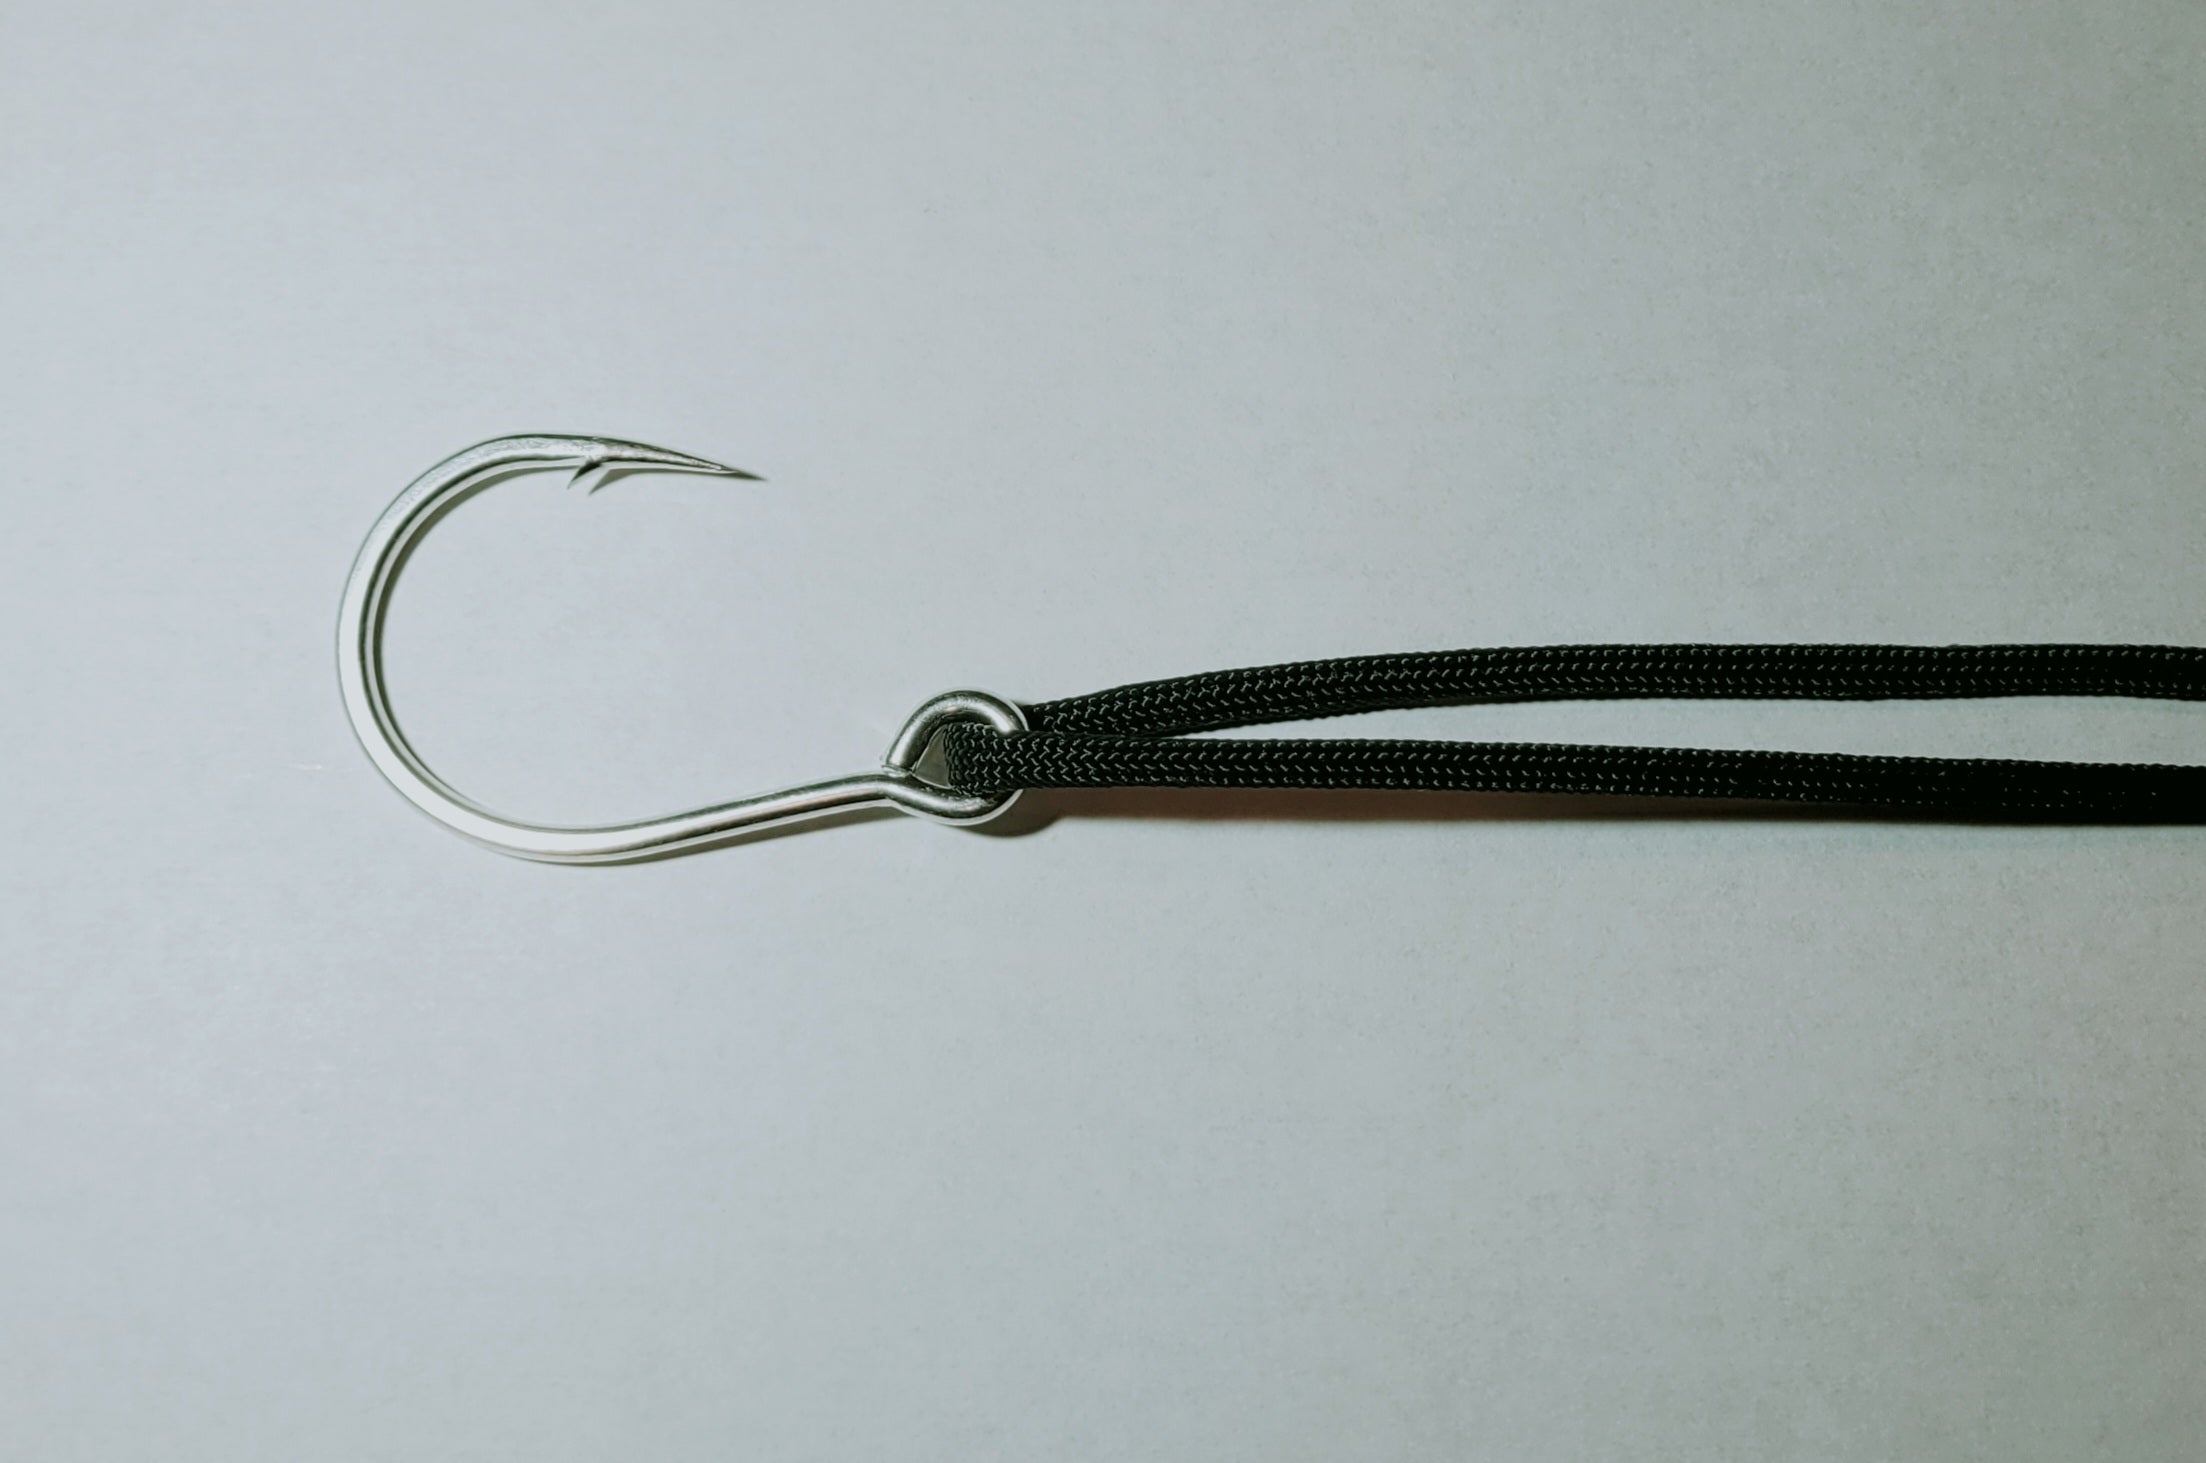 Are You Nuts? Know your Fishing Knots! – The Uni Knot